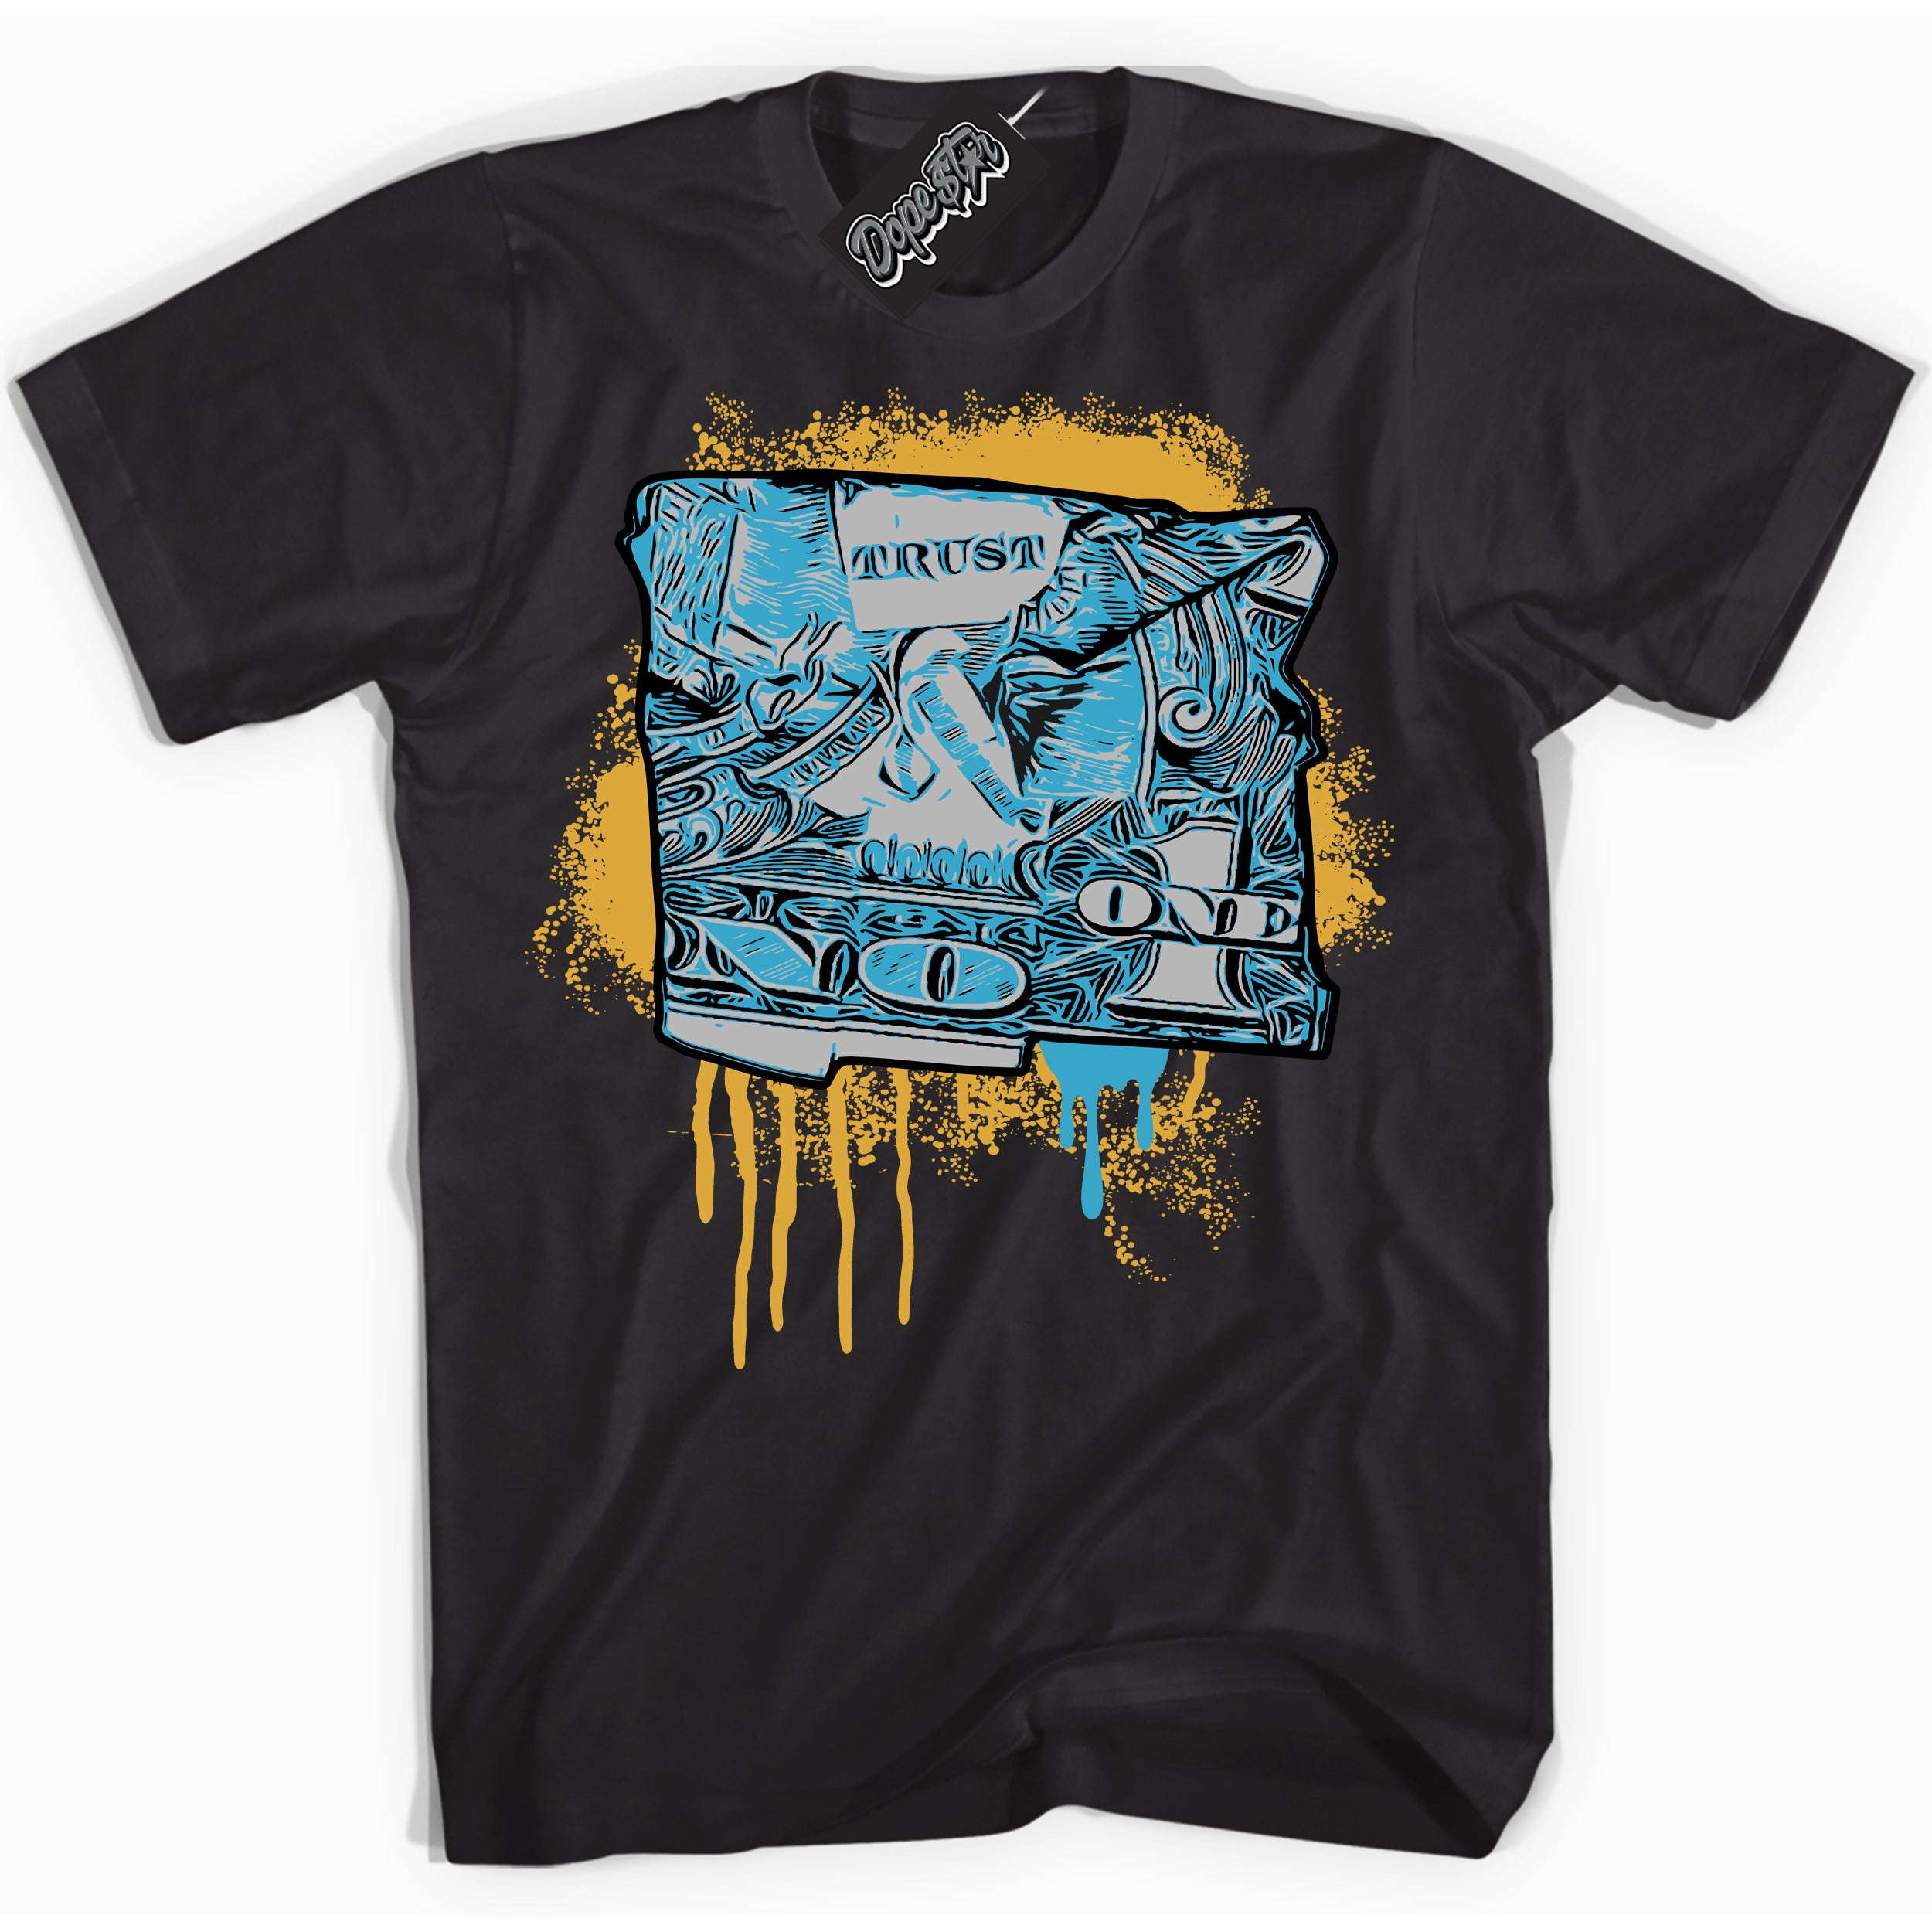 Cool Black Shirt with “ Trust No One Dollar” design that perfectly matches Aqua 5s Sneakers.